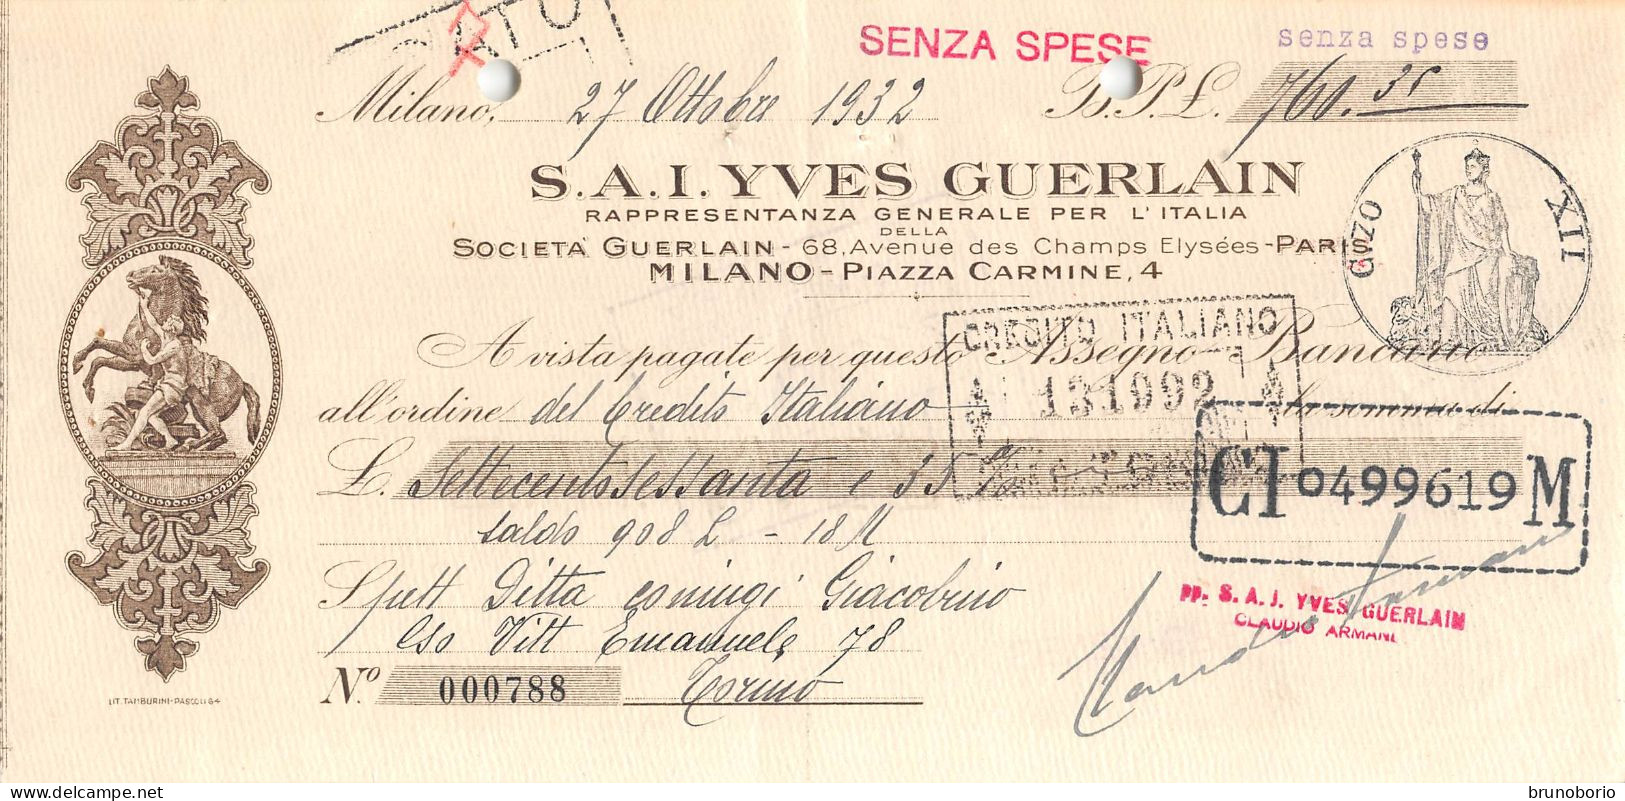 00156 "S.A.I. YVER GUERLAIN - PARIS - DITTA GIACOBINO . TORINO . CAMBIALE NR 000788 - MILANO 1932"  CAMBIALE ORIG - Bills Of Exchange